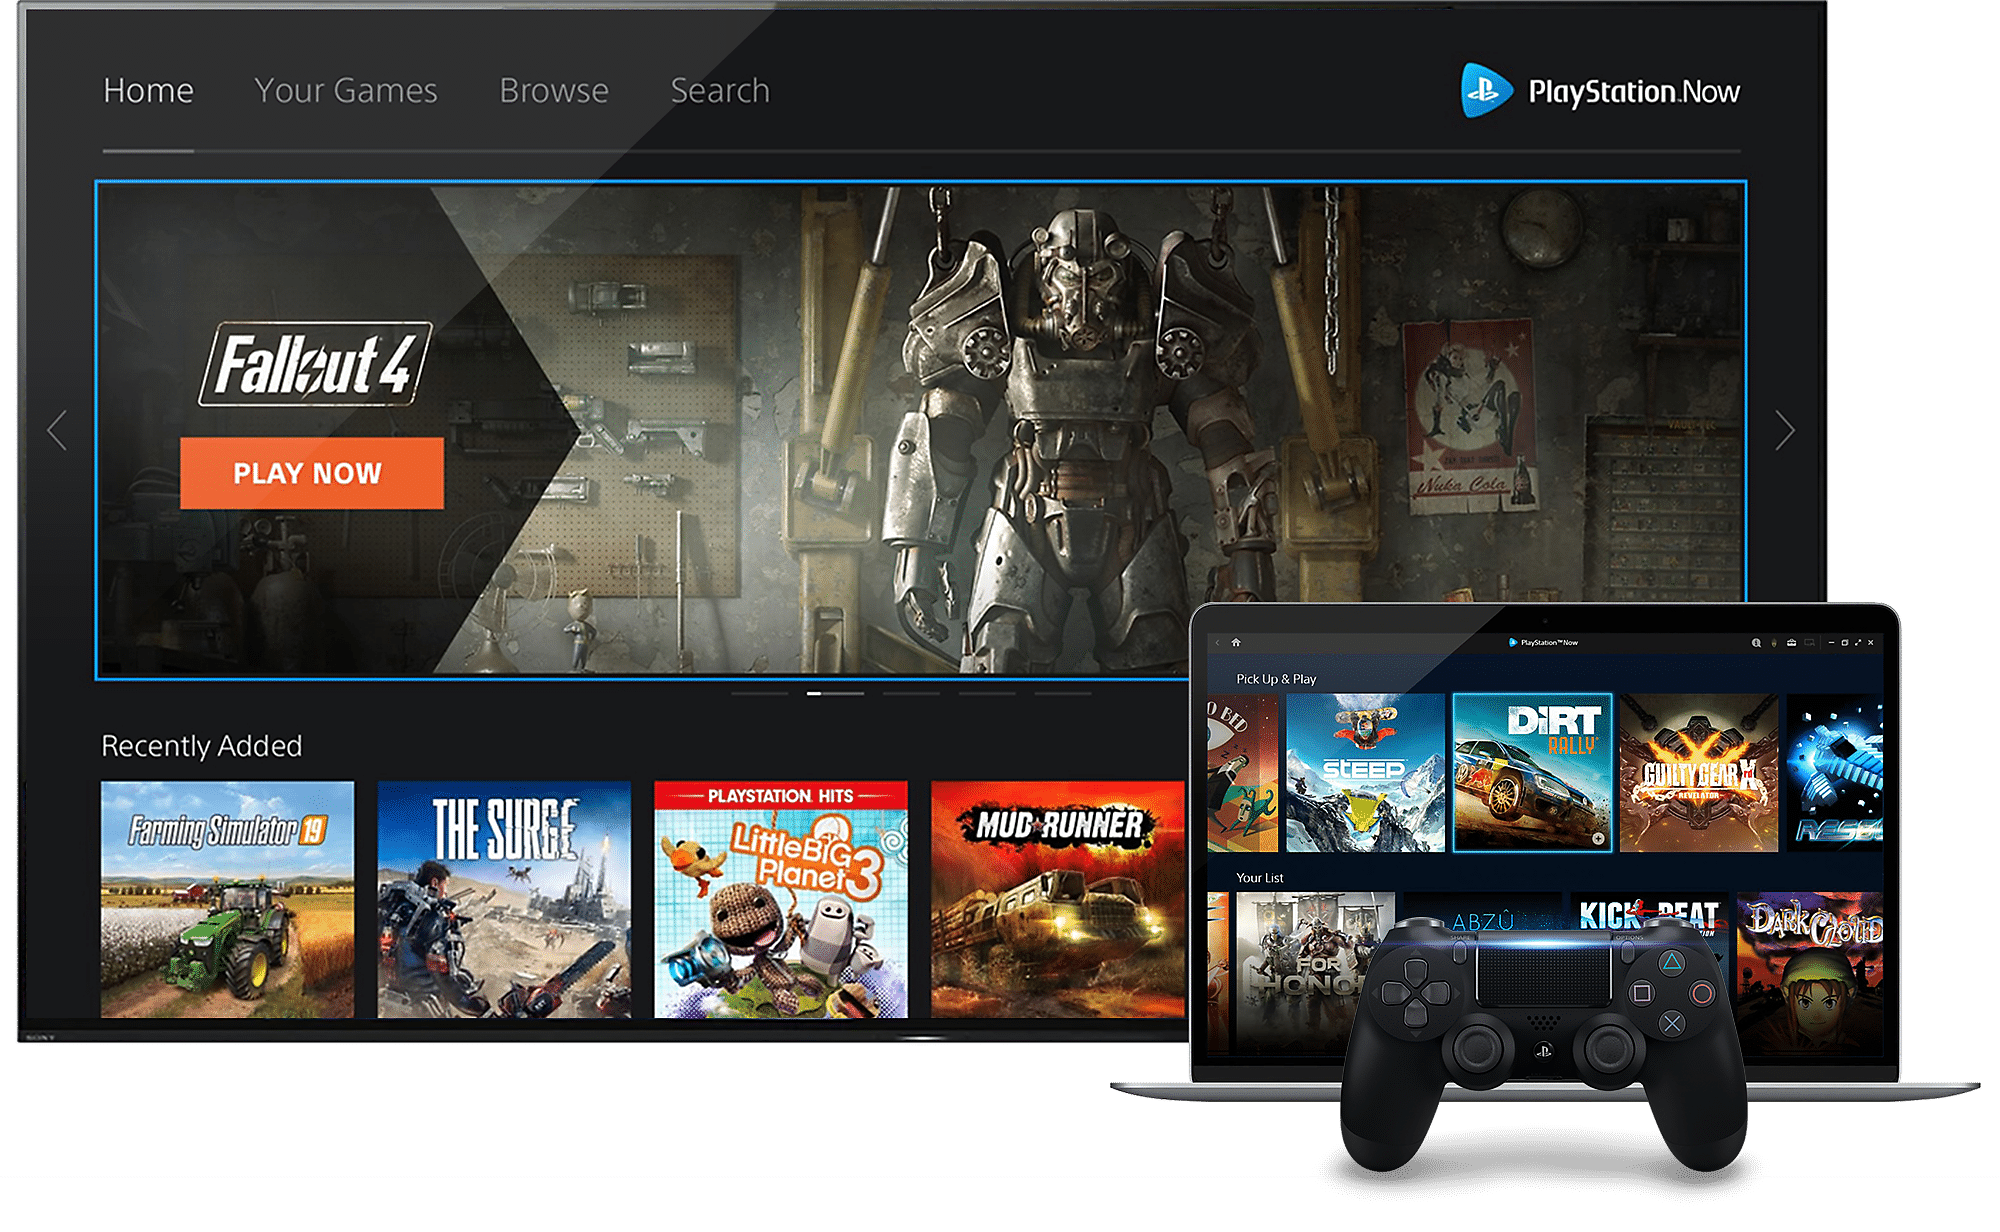 how to download games on playstation now